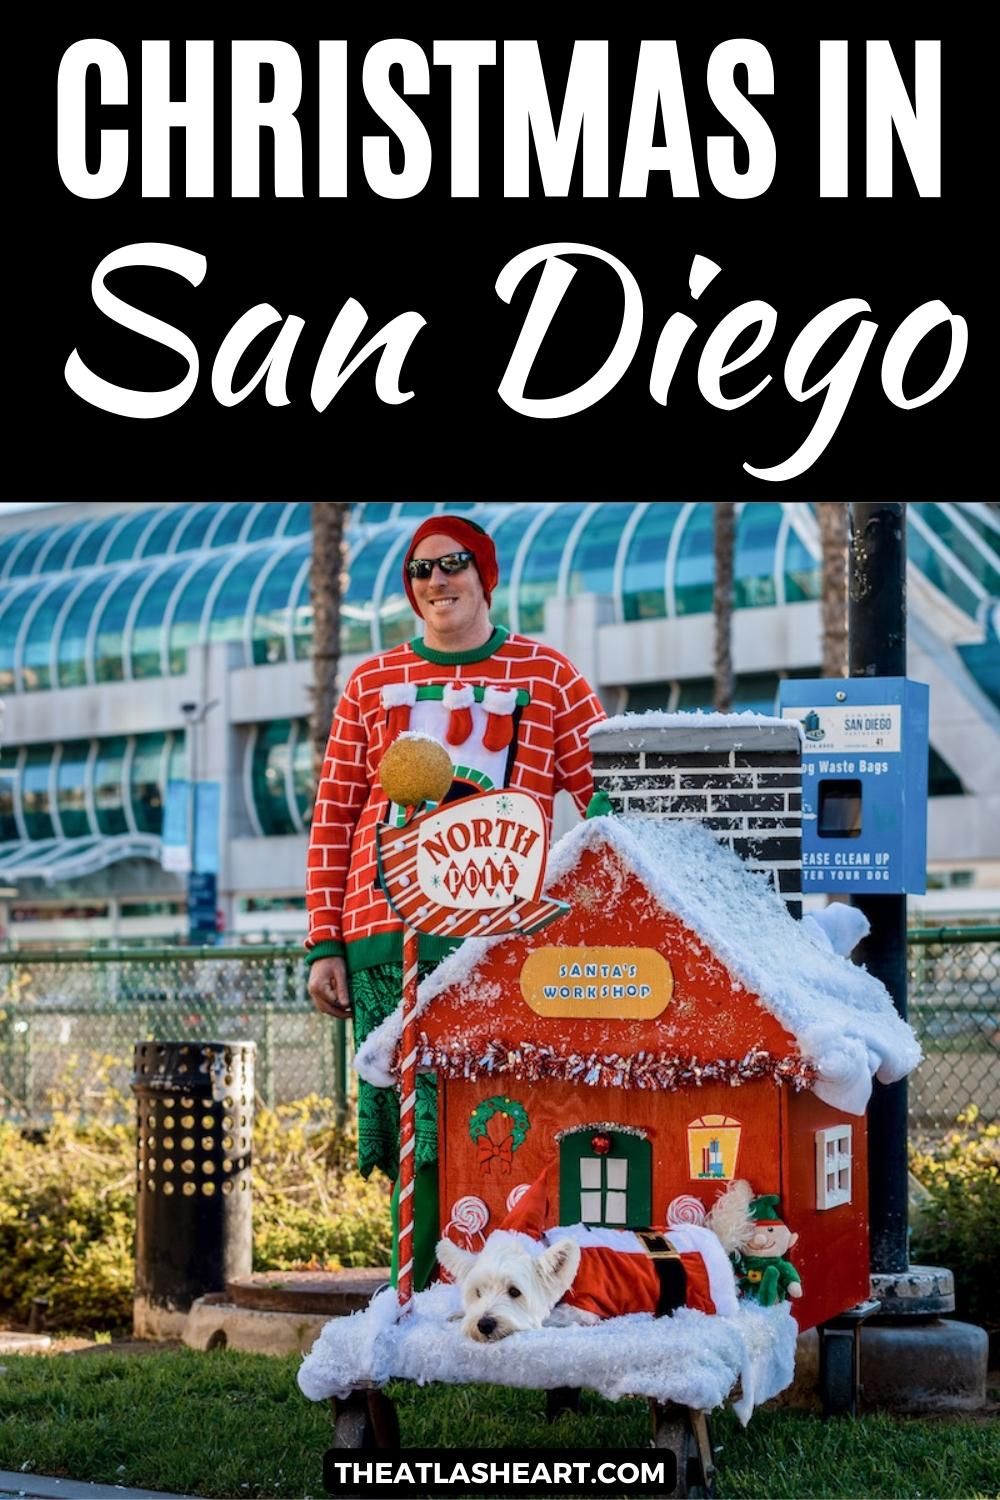 A man wearing an ugly Christmas sweater stands next to a small doghouse decorated like Santa's workshop, with a small, white dog in a Santa costume lying out front, and palm trees in the background, with the text overlay, "Christmas in San Diego."